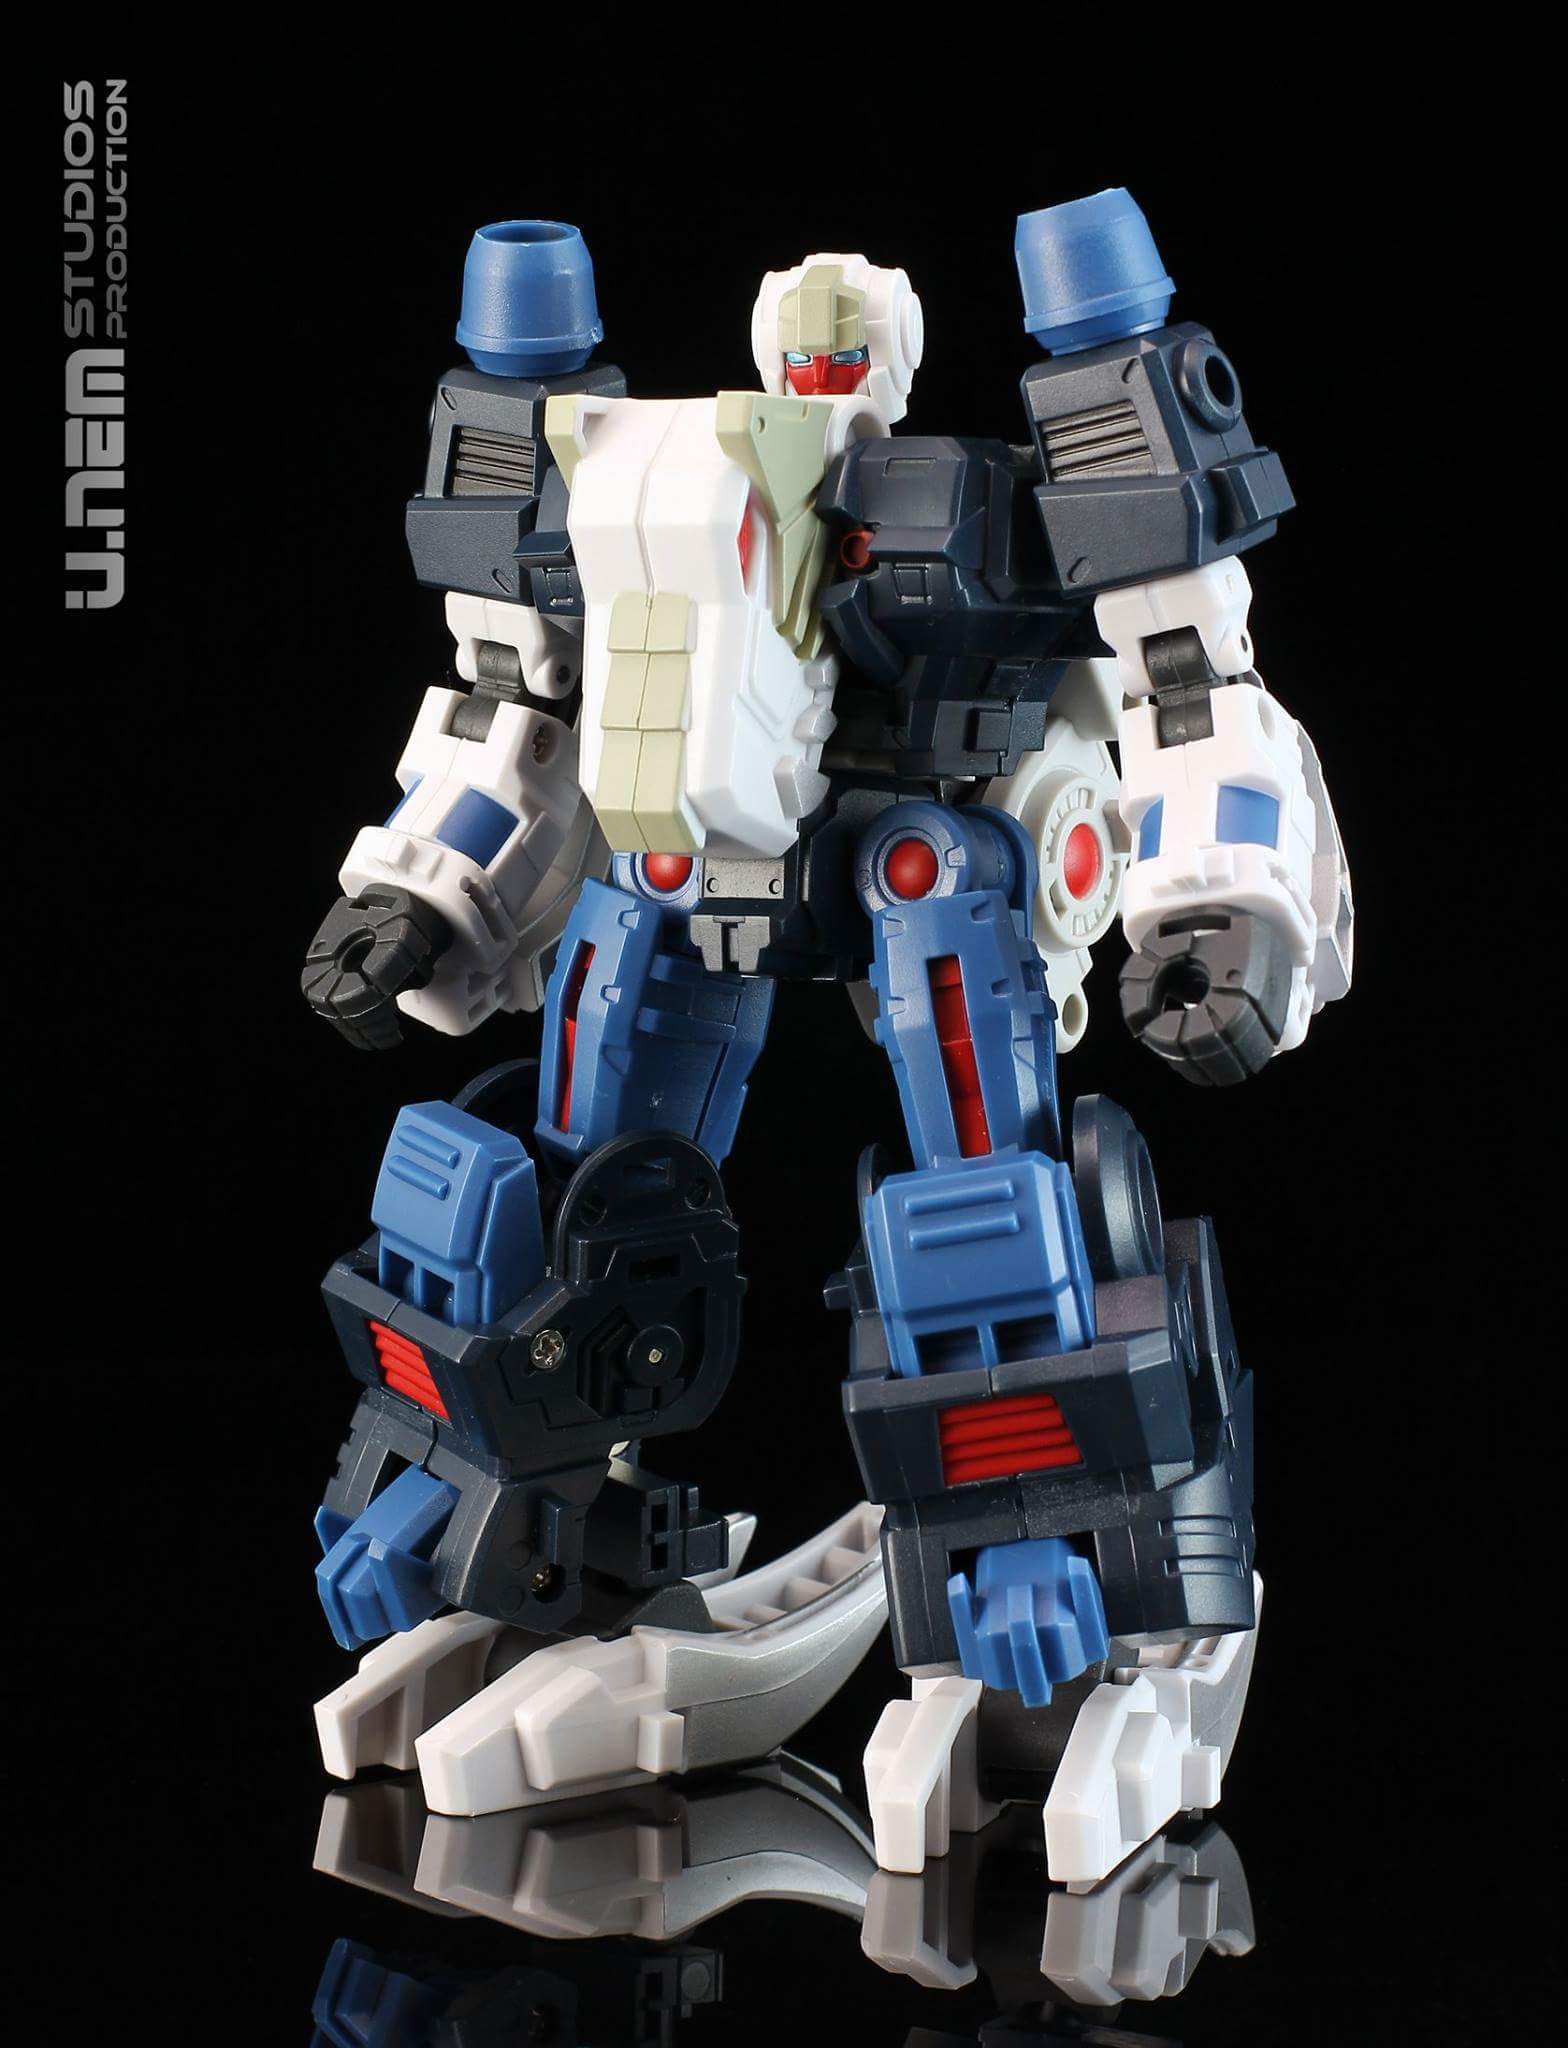 [FansProject] Produit Tiers - Ryu-Oh aka Dinoking (Victory) | Beastructor aka Monstructor (USA) - Page 3 KcknsZS5